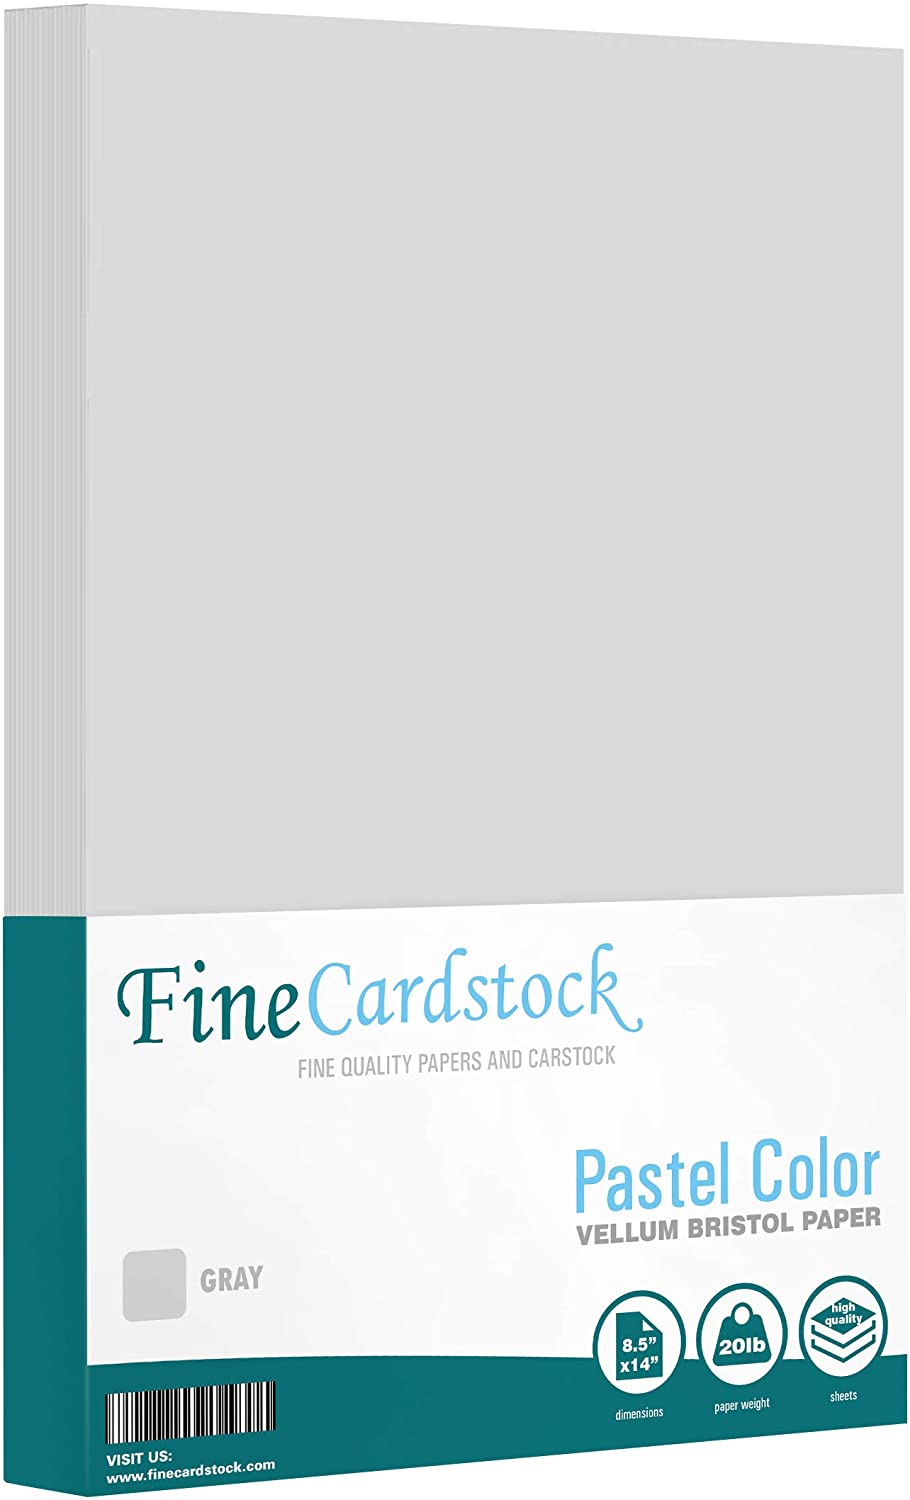 Superfine Printing 8.5" x 14" Pastel Color Paper - Lightweight, 20 lb., 100 Sheets, Gray - image 1 of 6